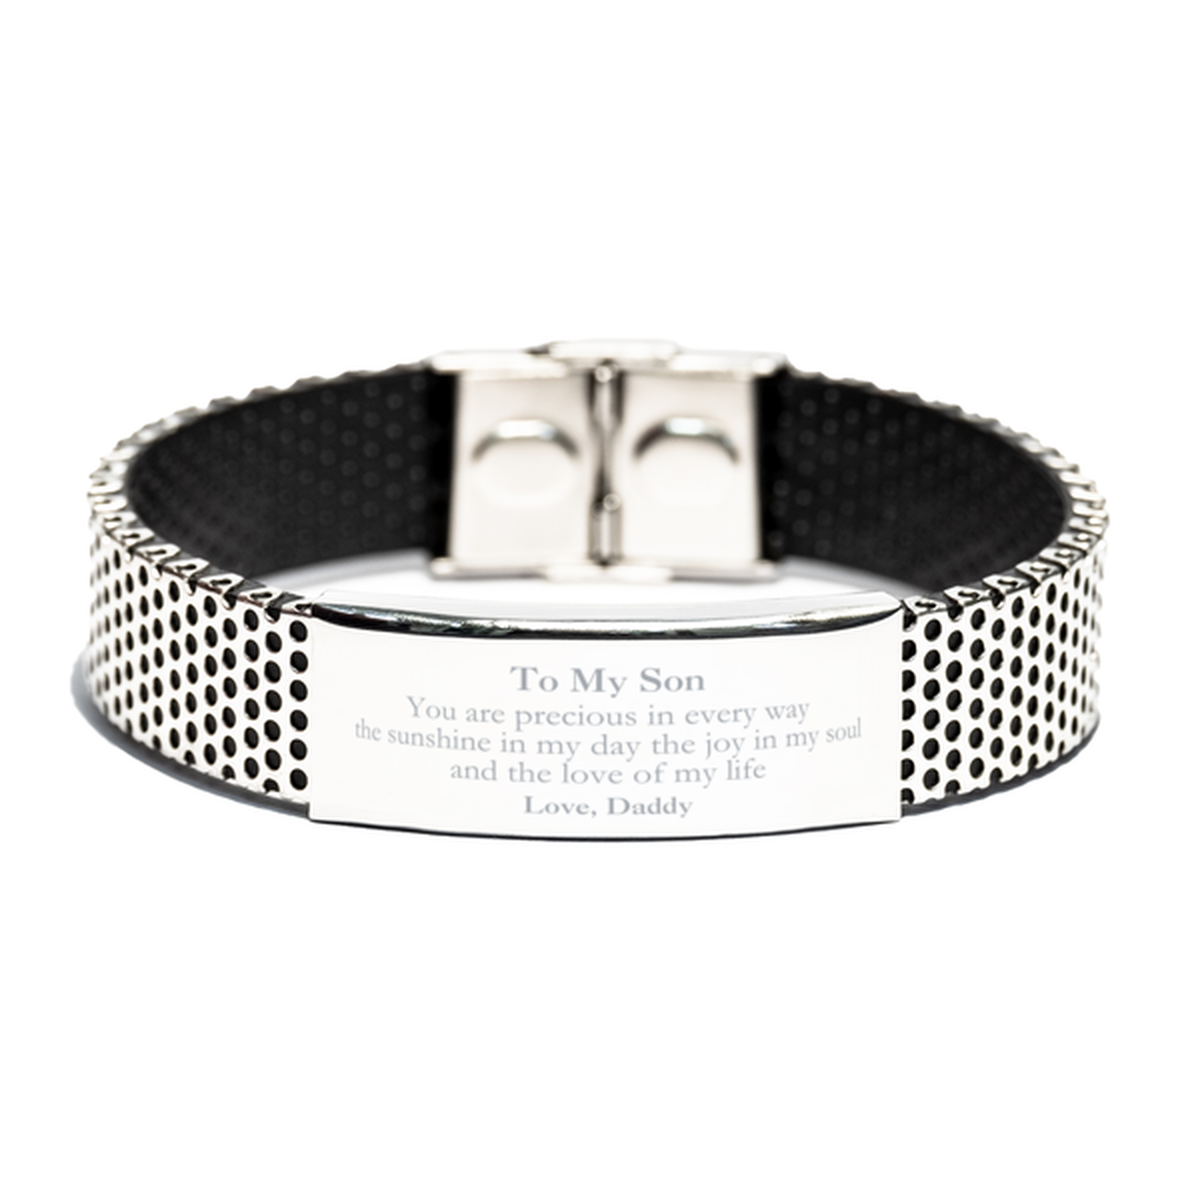 Graduation Gifts for Son Stainless Steel Bracelet Present from Daddy, Christmas Son Birthday Gifts Son You are precious in every way the sunshine in my day. Love, Daddy